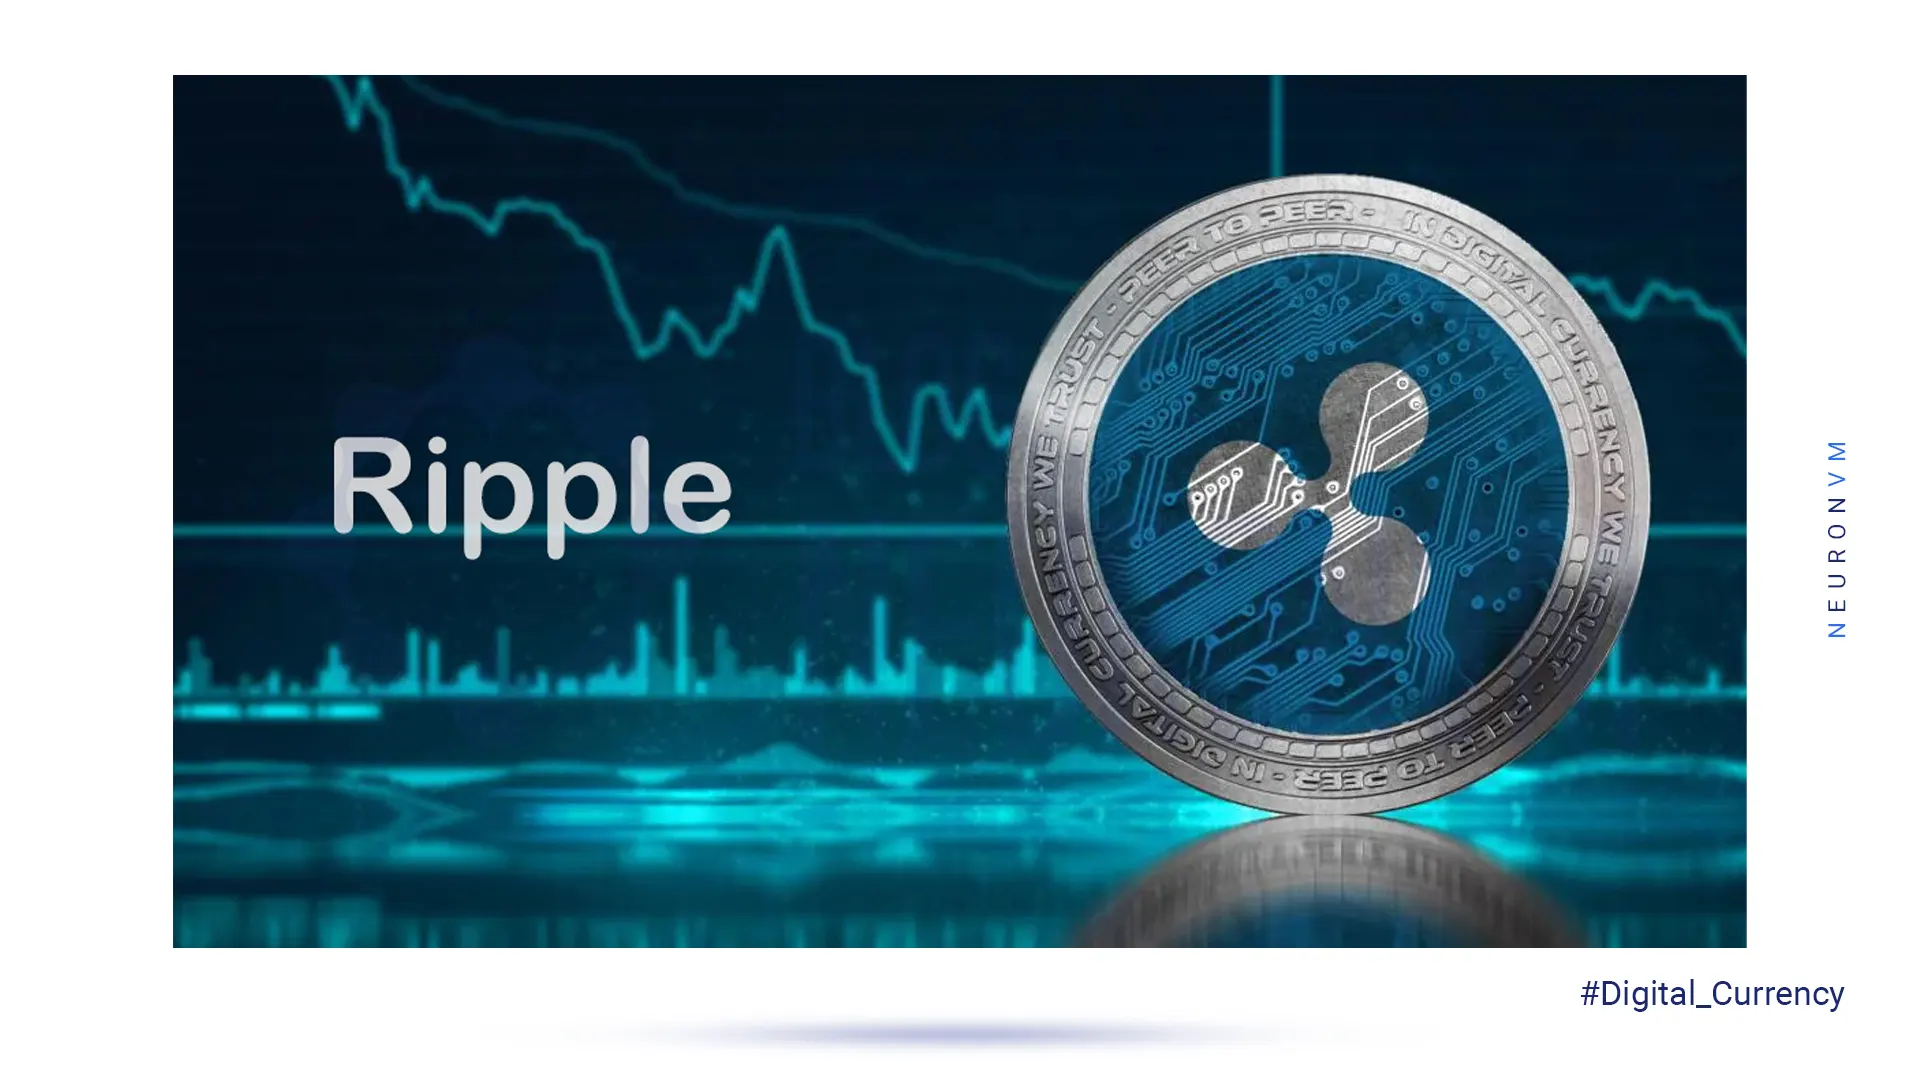 What is the Ripple Digital Currency